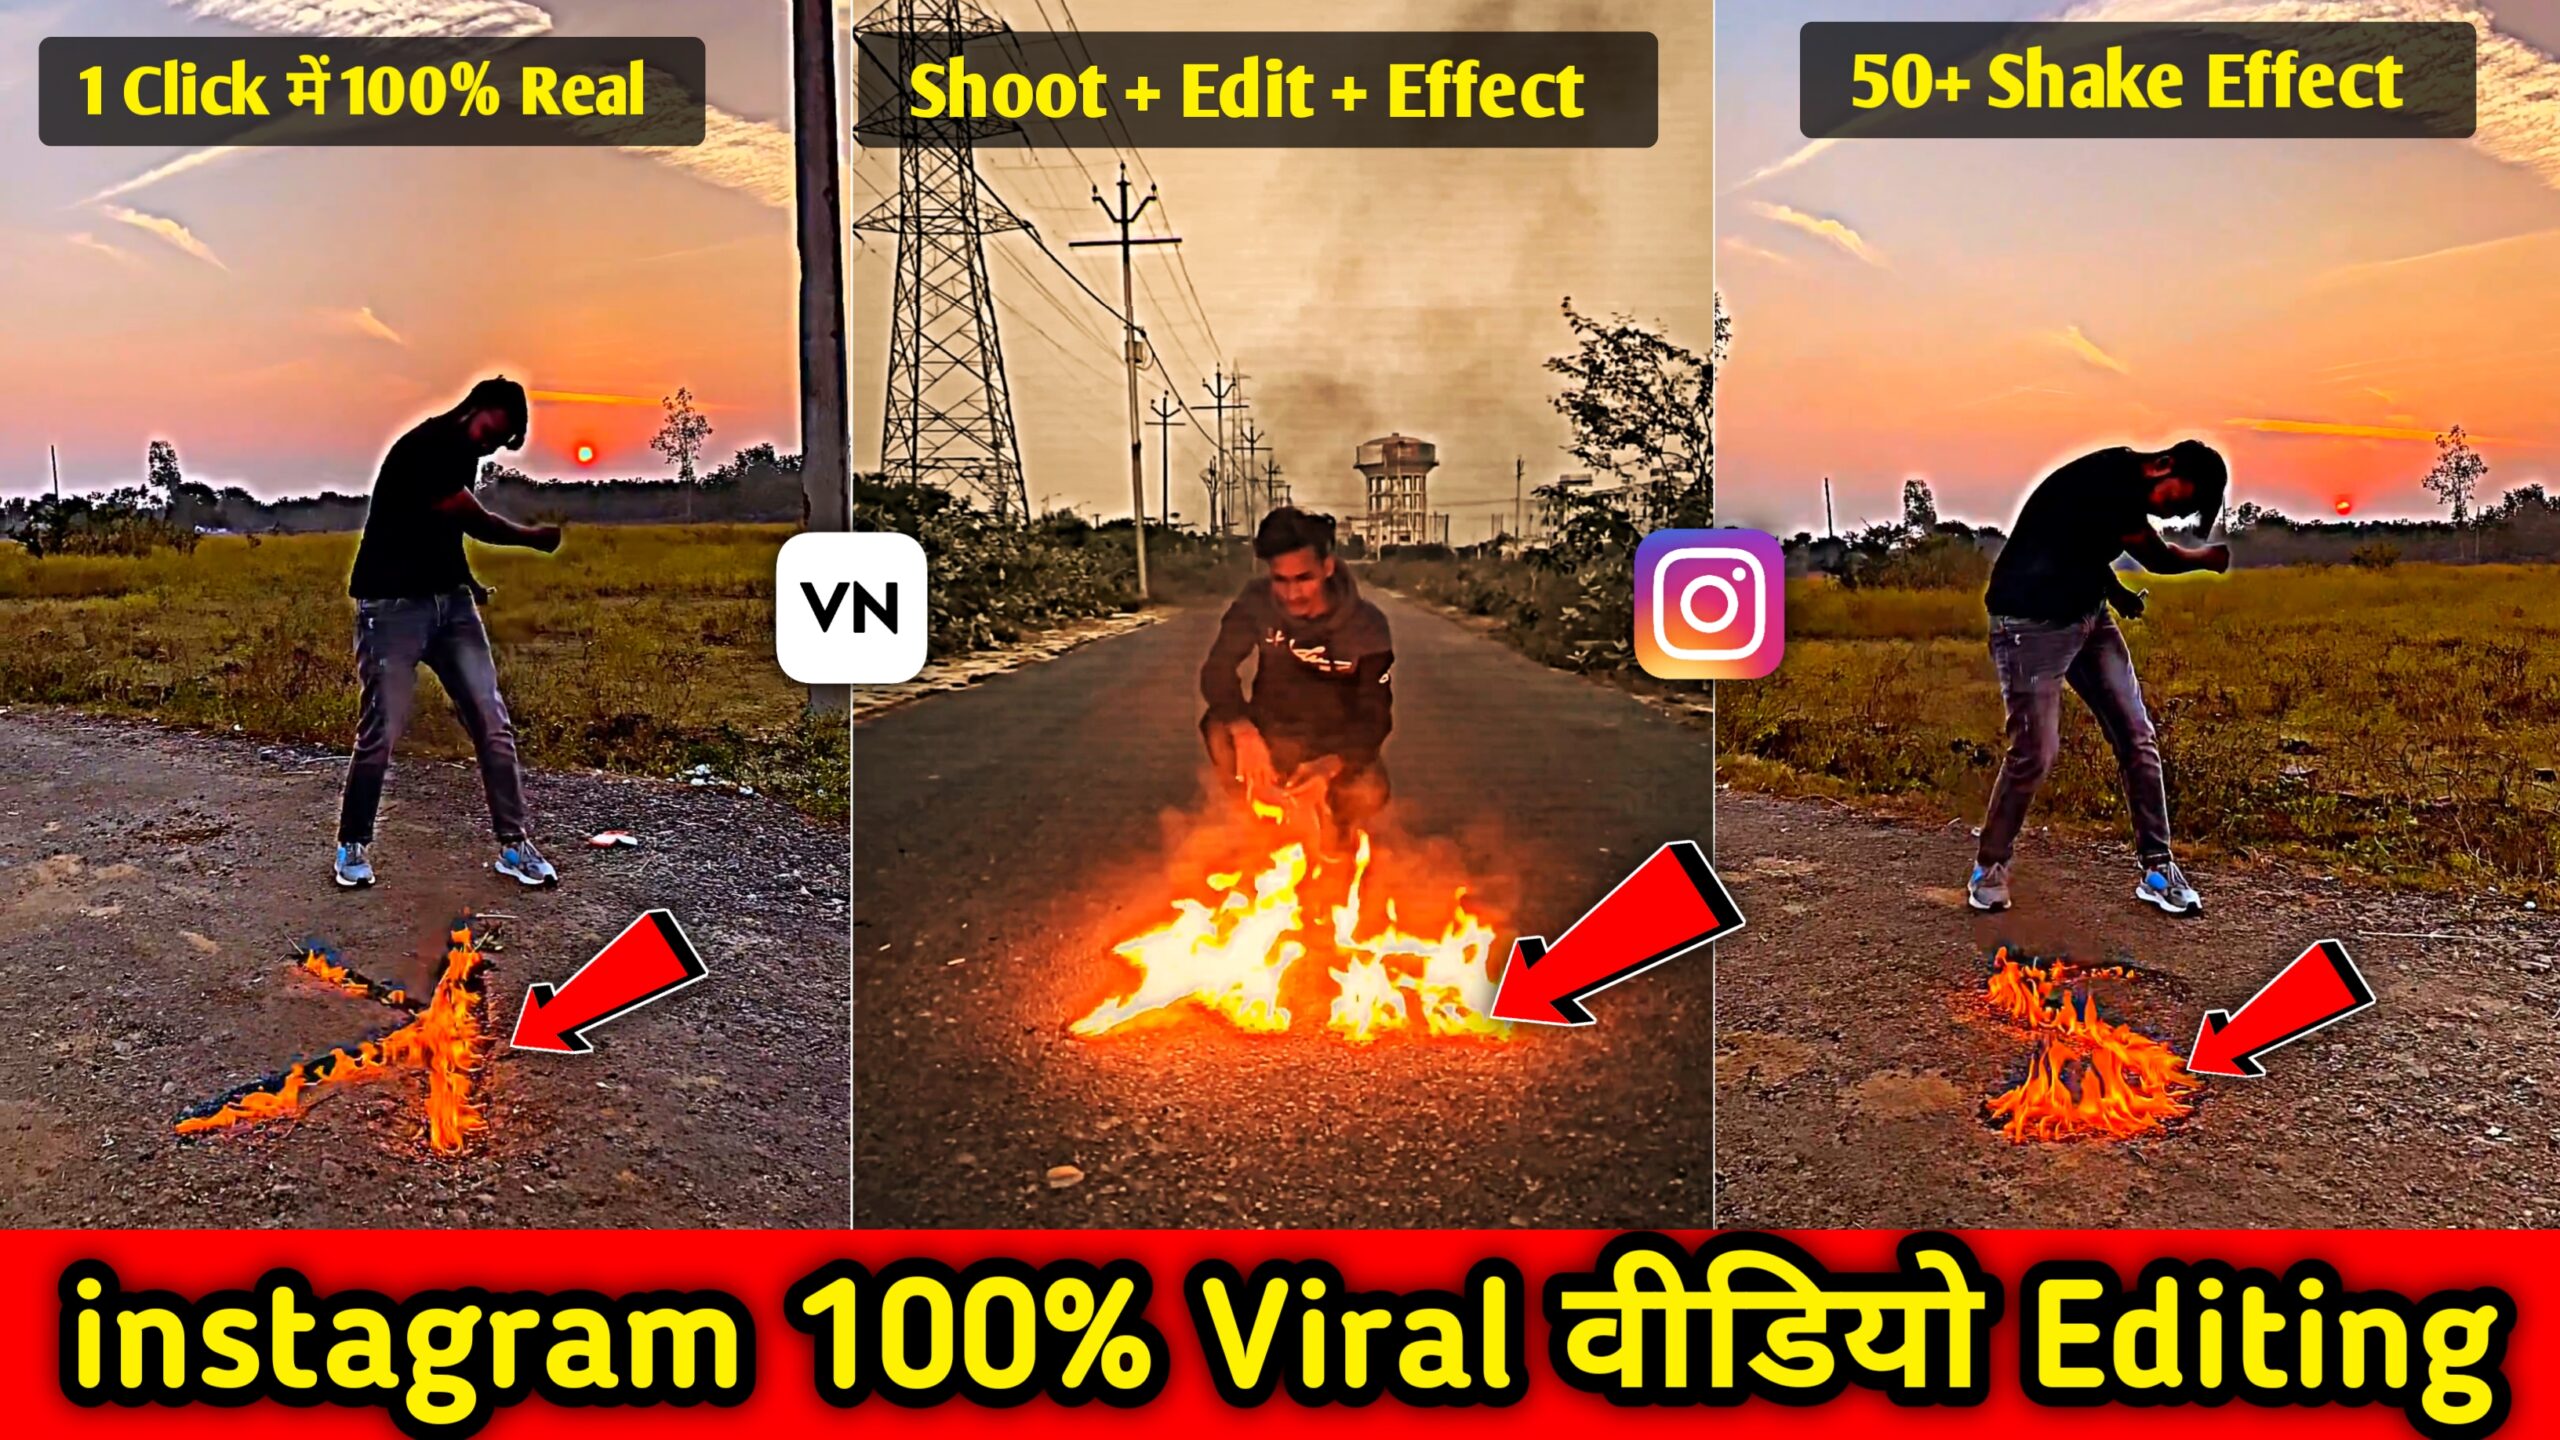 Instagram Viral Fire Video Editing in VN App Download Material